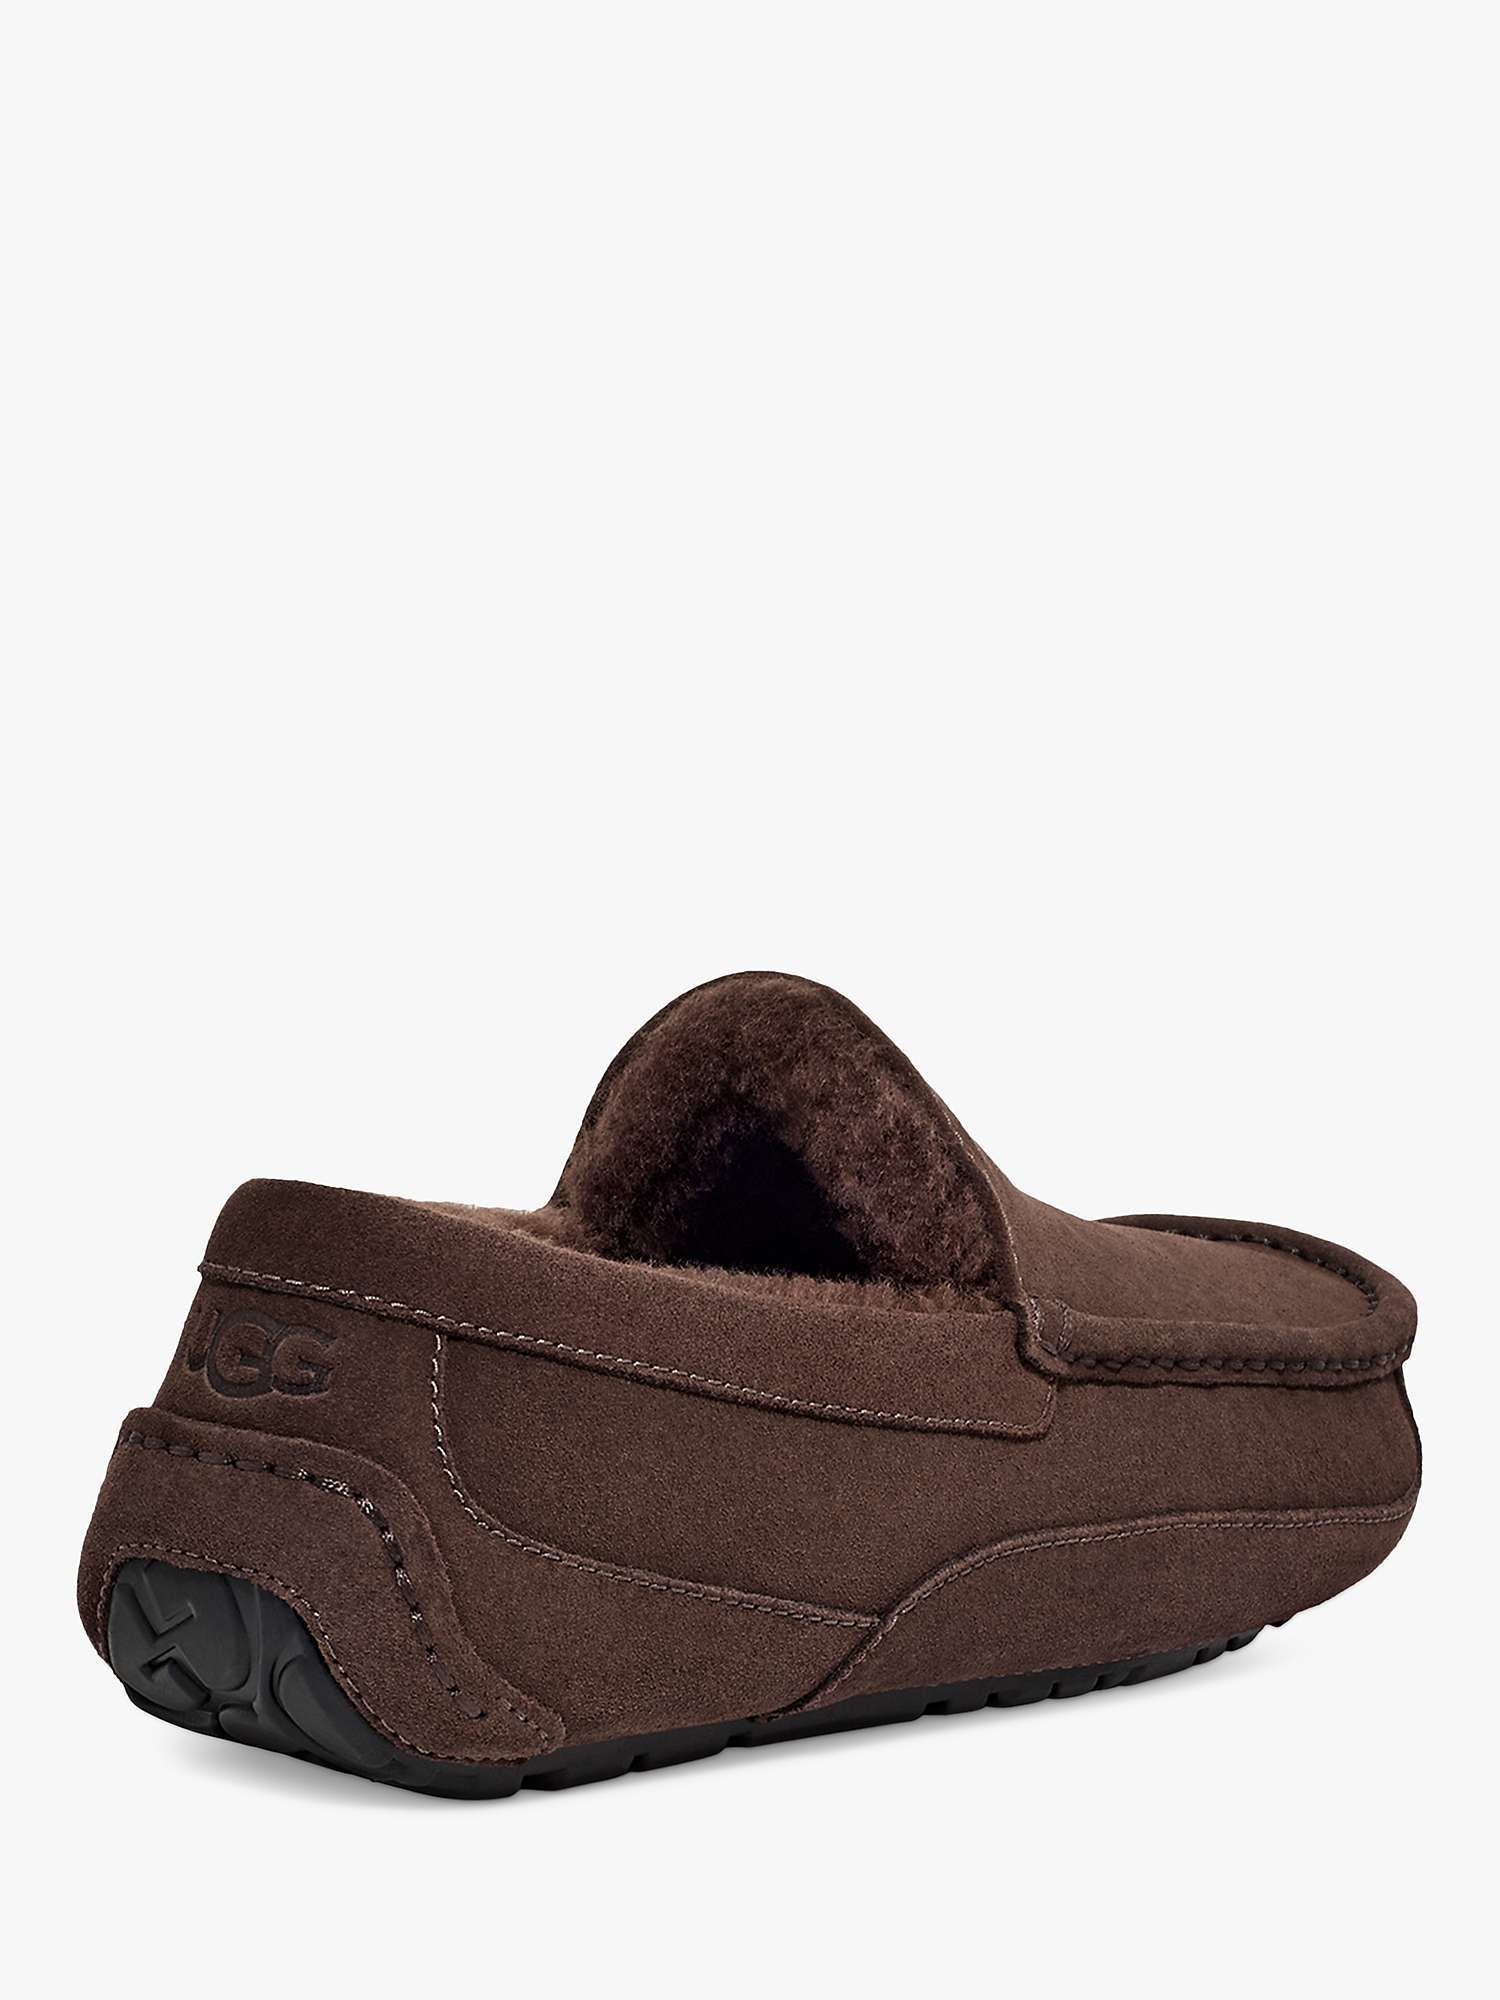 Buy UGG Ascot Moccasin Suede Slippers Online at johnlewis.com